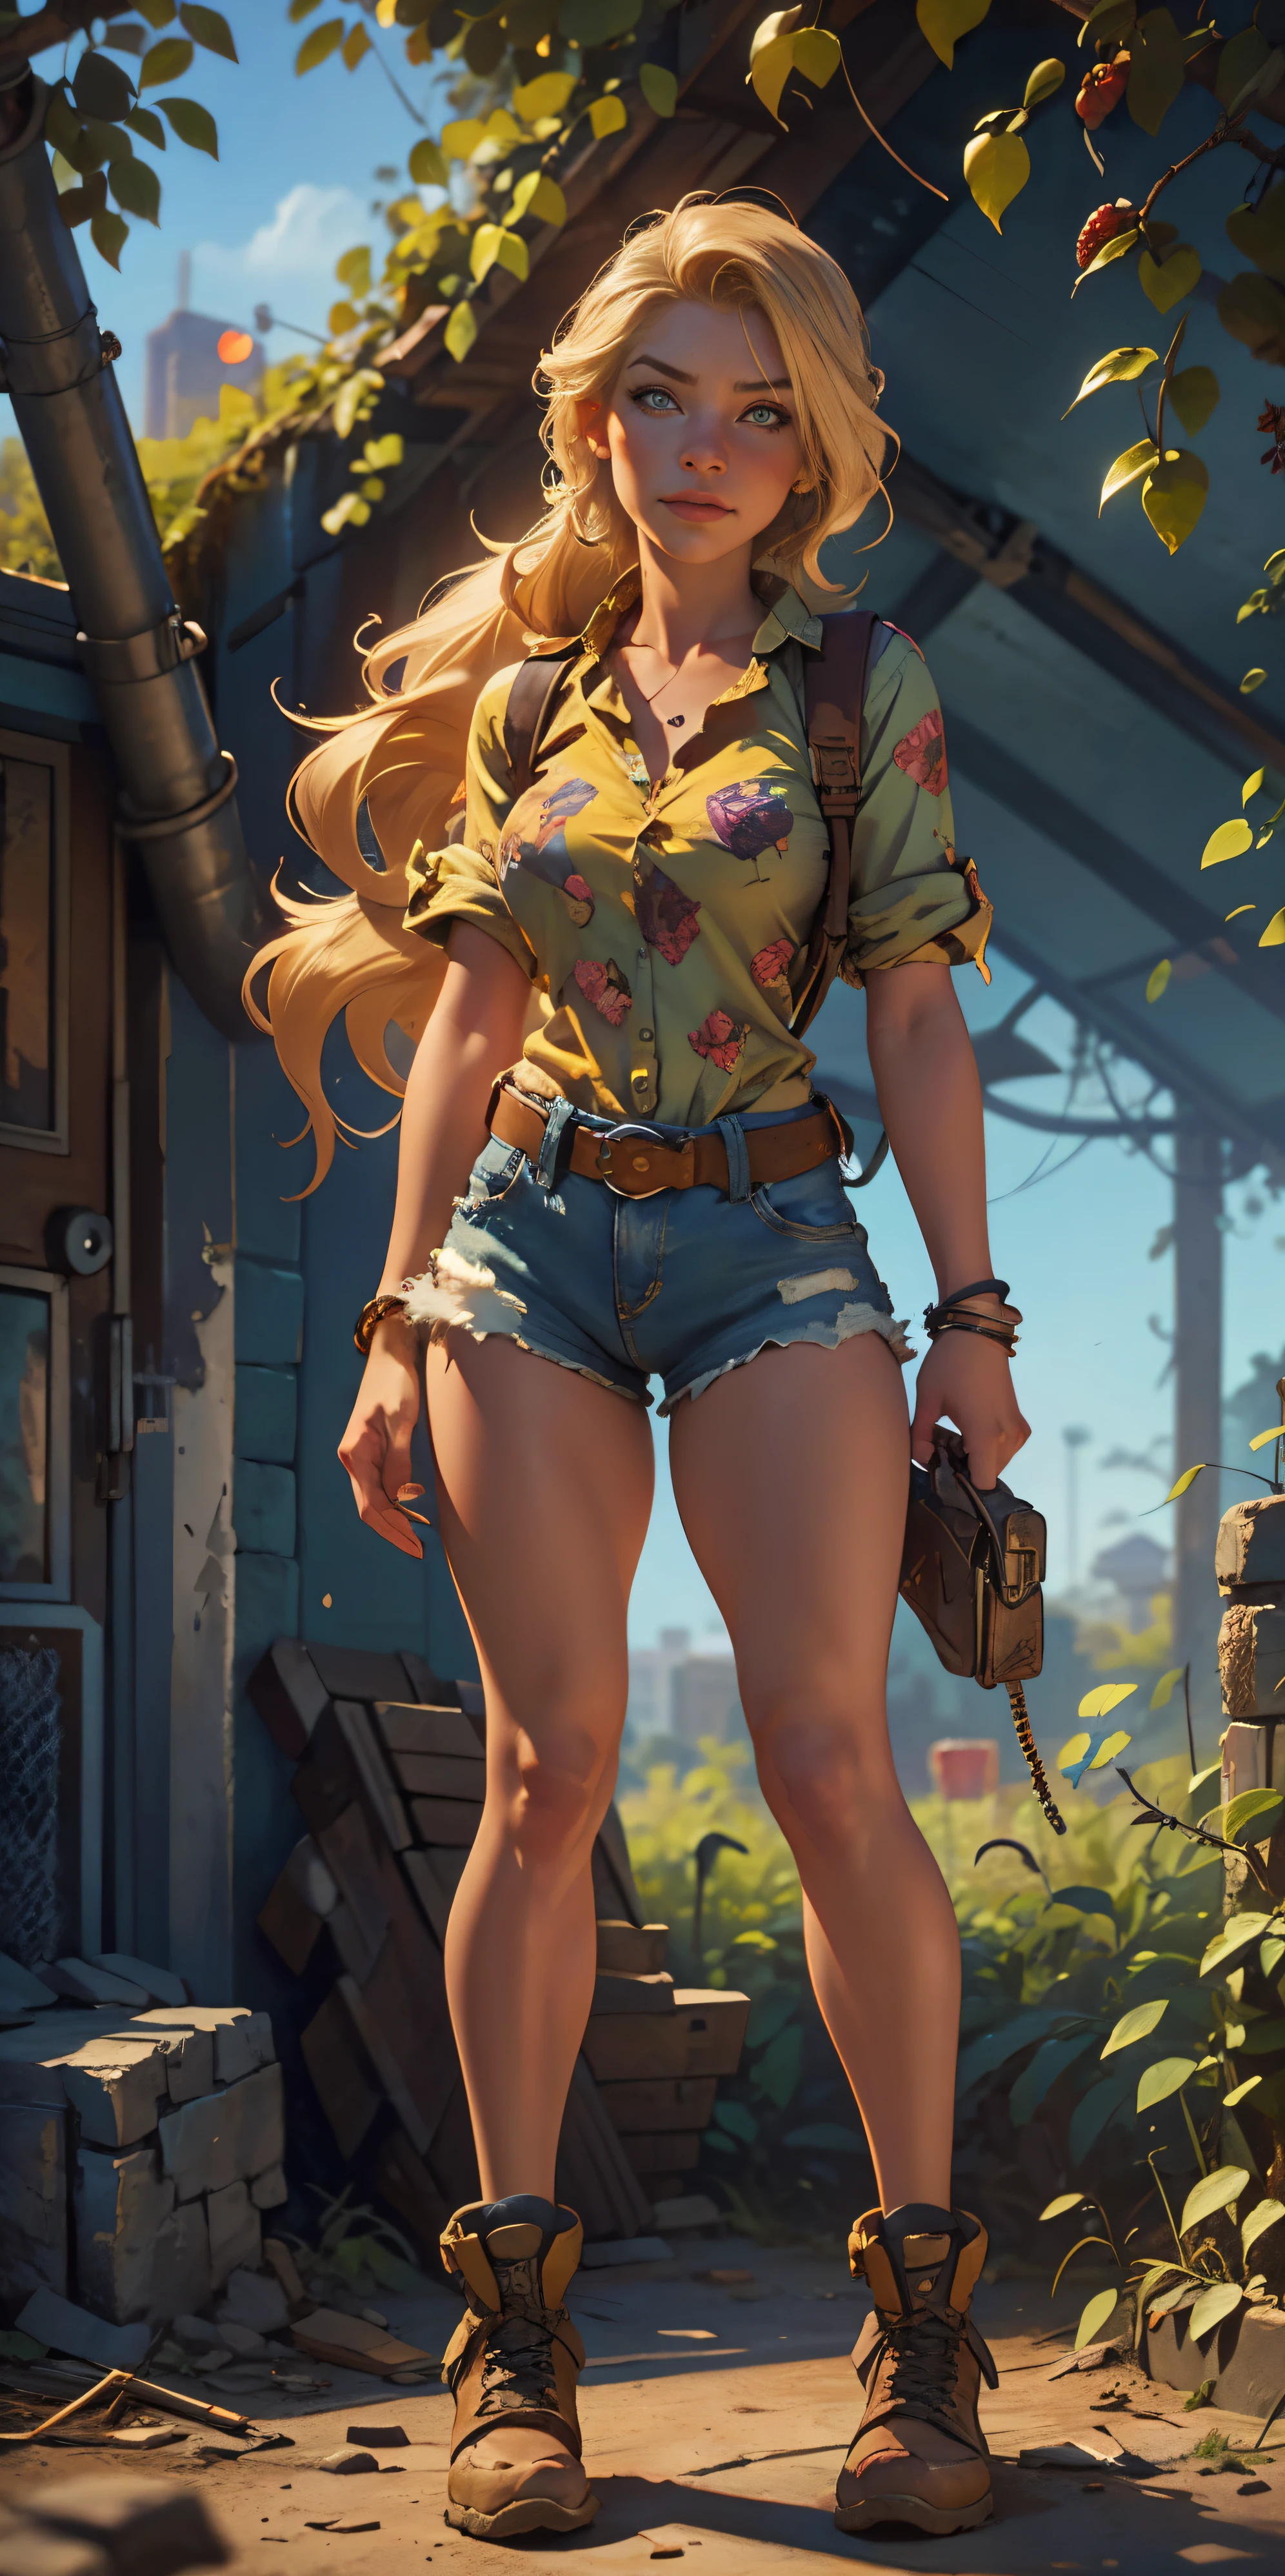 2076 year. The Urban Ruins of the Wasteland, Female huntress picking fruit in the garden, beautiful face, blonde, badly torn shirt and denim shorts ,  long legs, sweating through, sun rising, Nice warm colors, head to toe full body shot